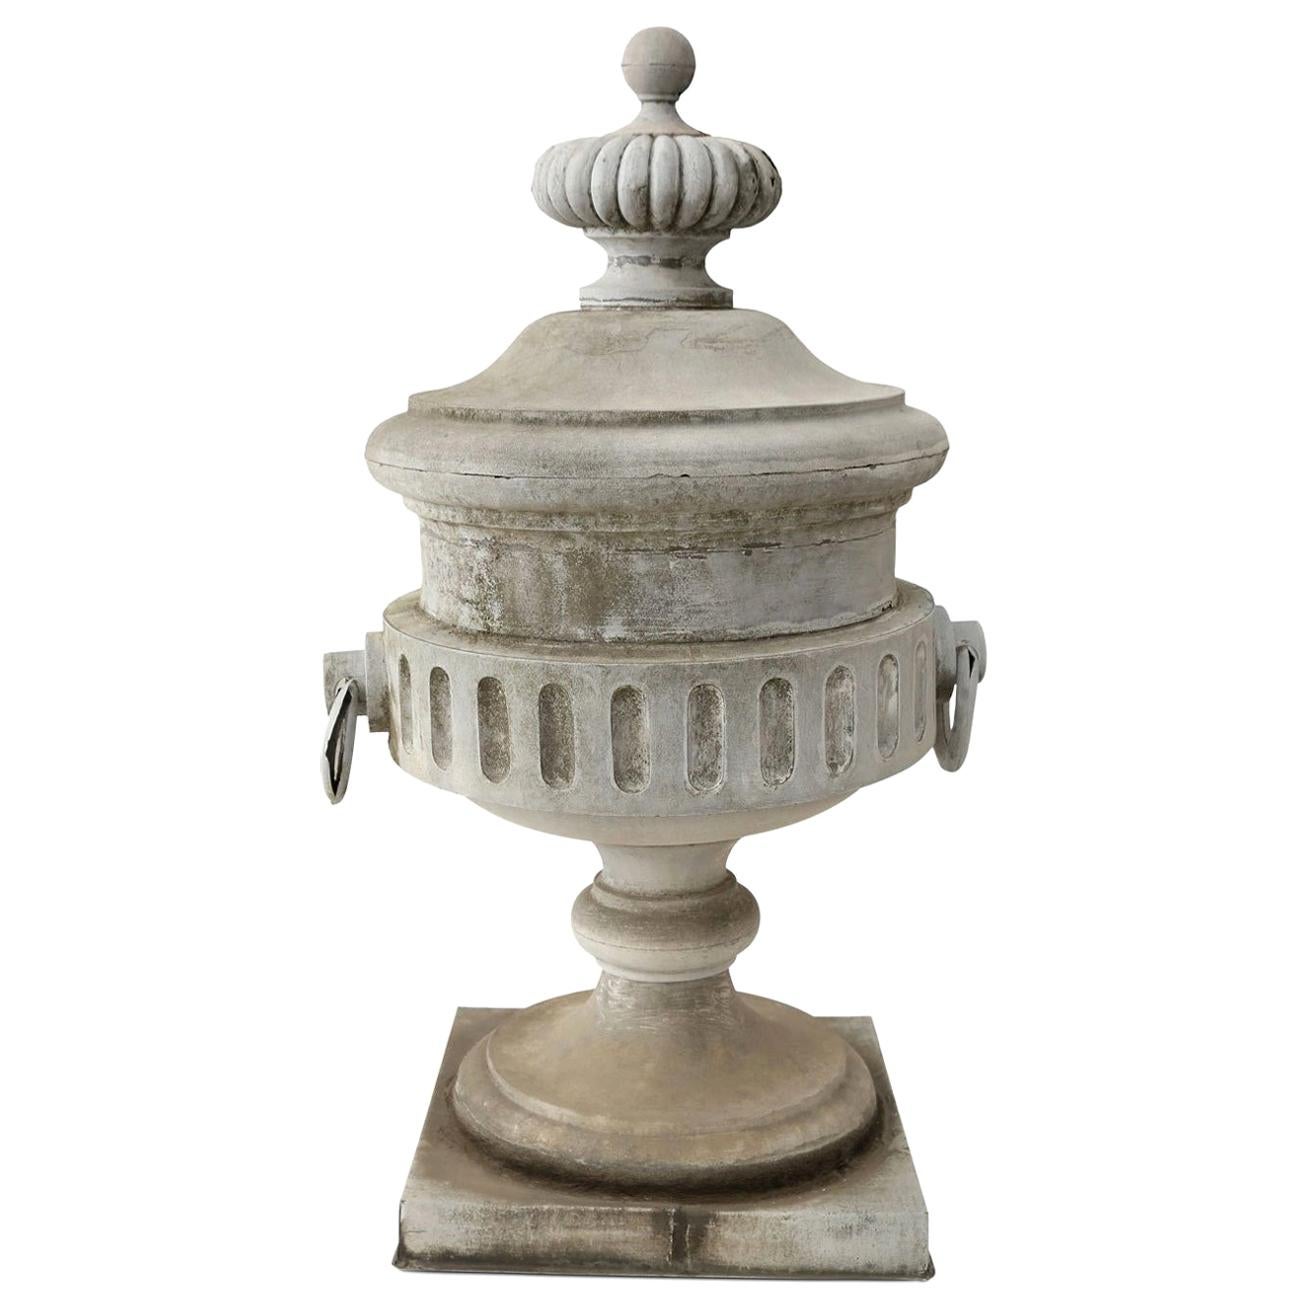 Monumental urn-shape zinc finial: extremely decorative architectural element from 19th century French building.

Note: Original/early finish on antique and vintage metal will include some, or all, of the following: patina, scaling, light rust,